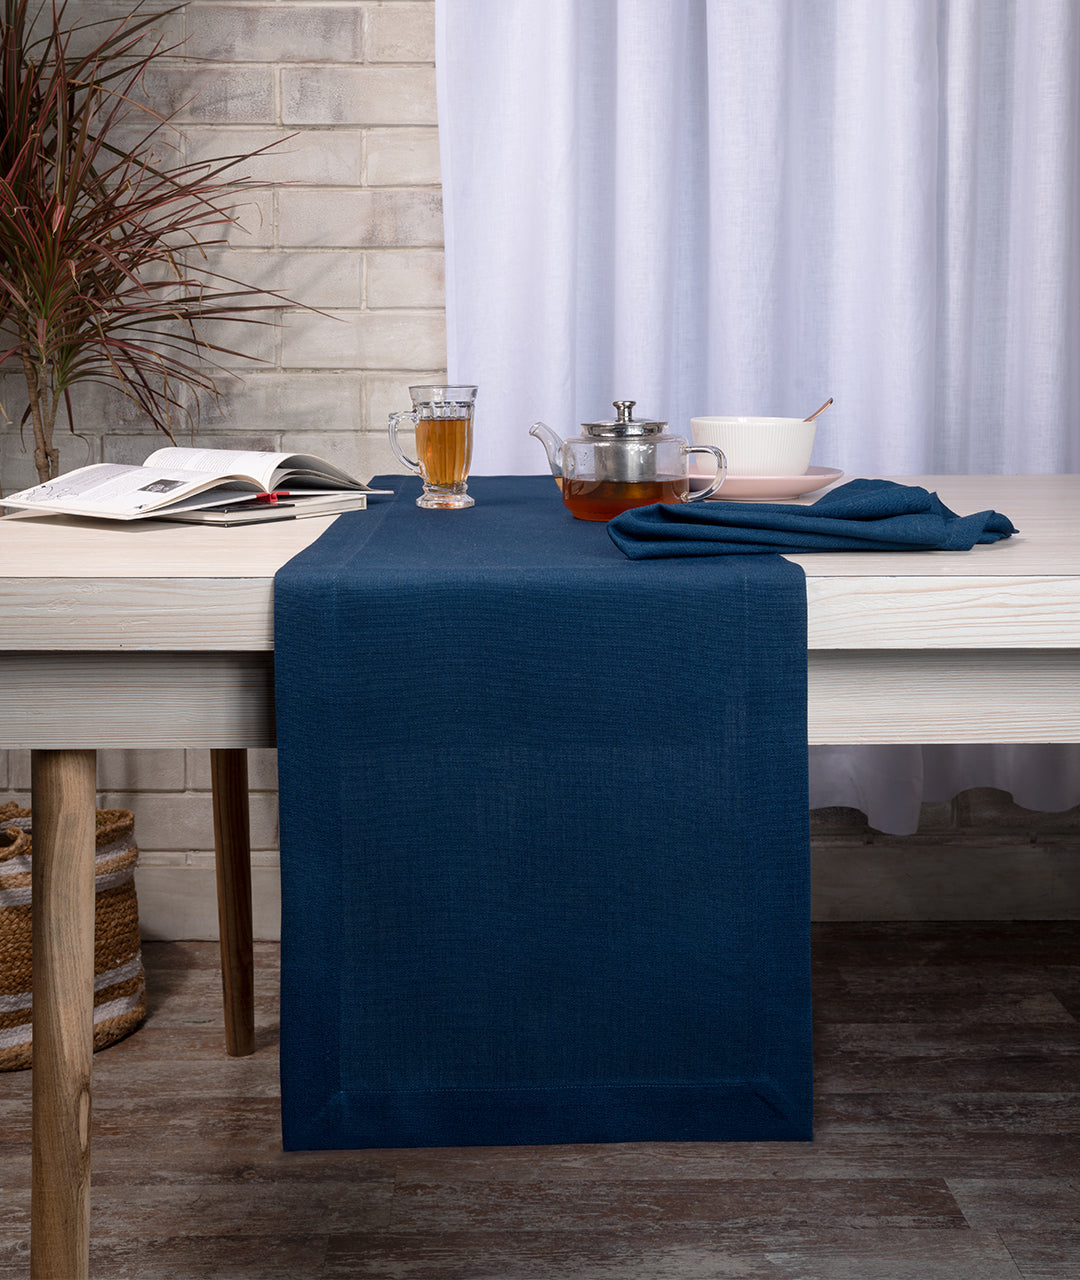 Navy Blue Linen Look Recycled Fabric Mitered Corner Table Runner